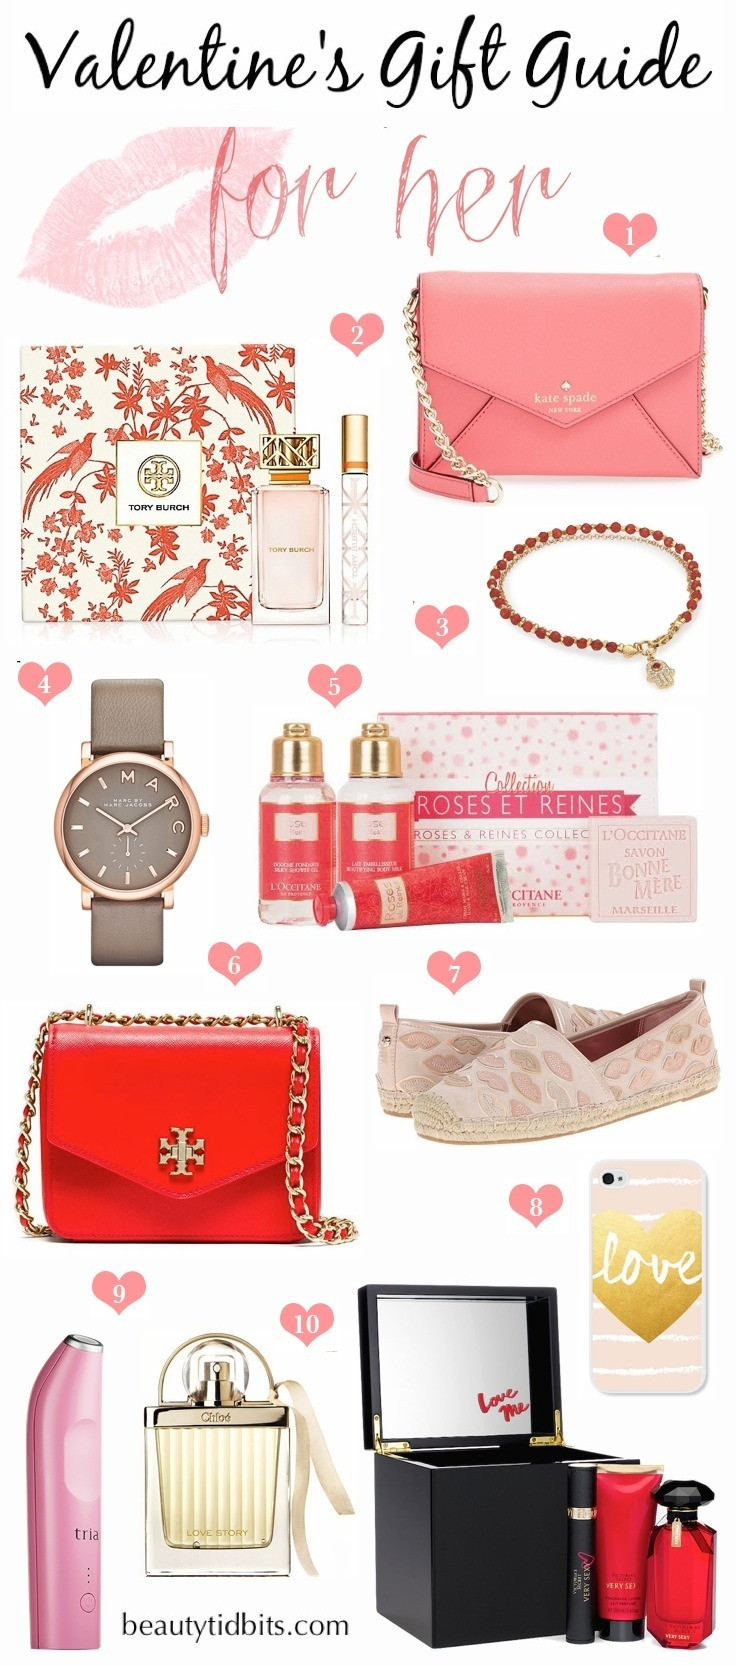 Valentines Gift For Her Ideas
 Valentine s Day Gift Guide For Her